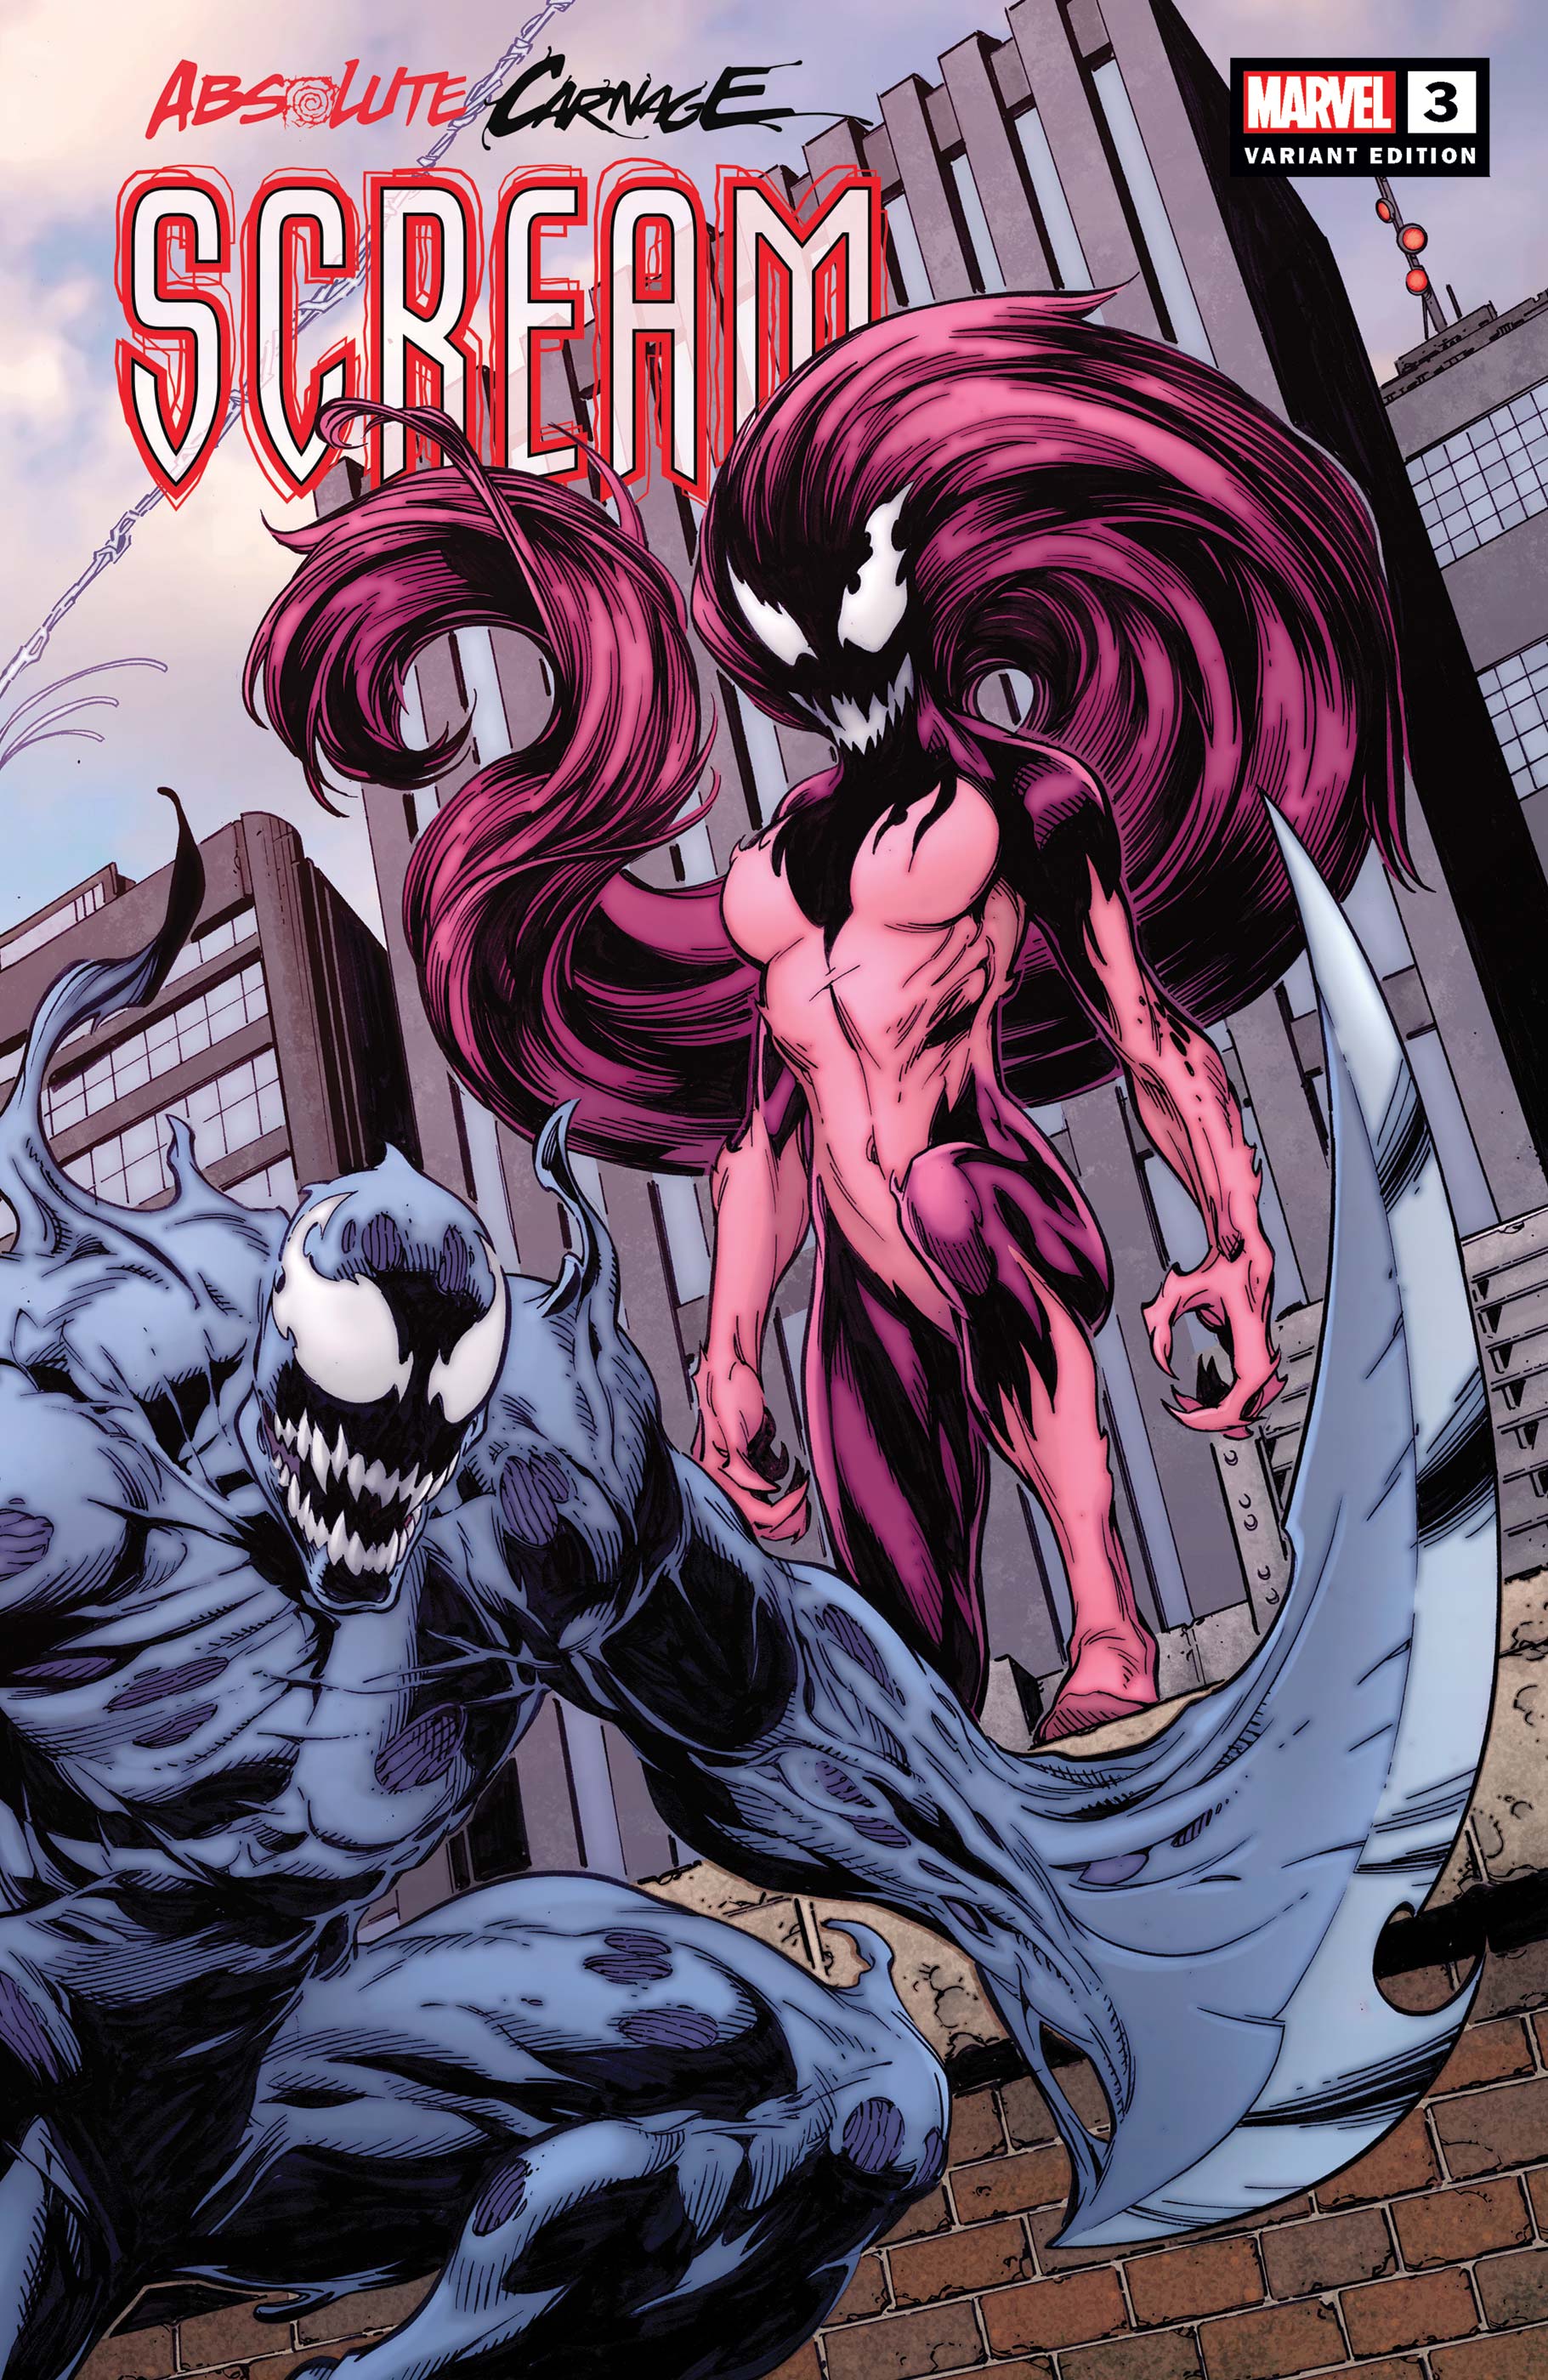 Absolute Carnage: Scream (2019) #3 (Variant)